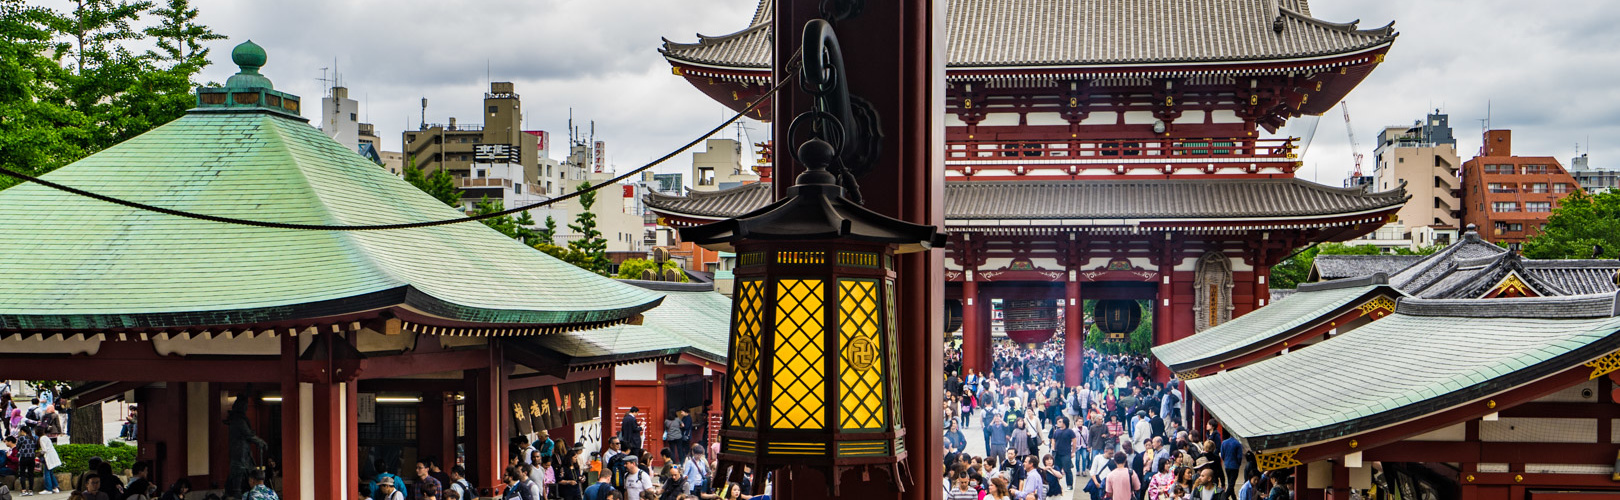 A Tourist’s View of Tokyo: Sunday in Asakusa